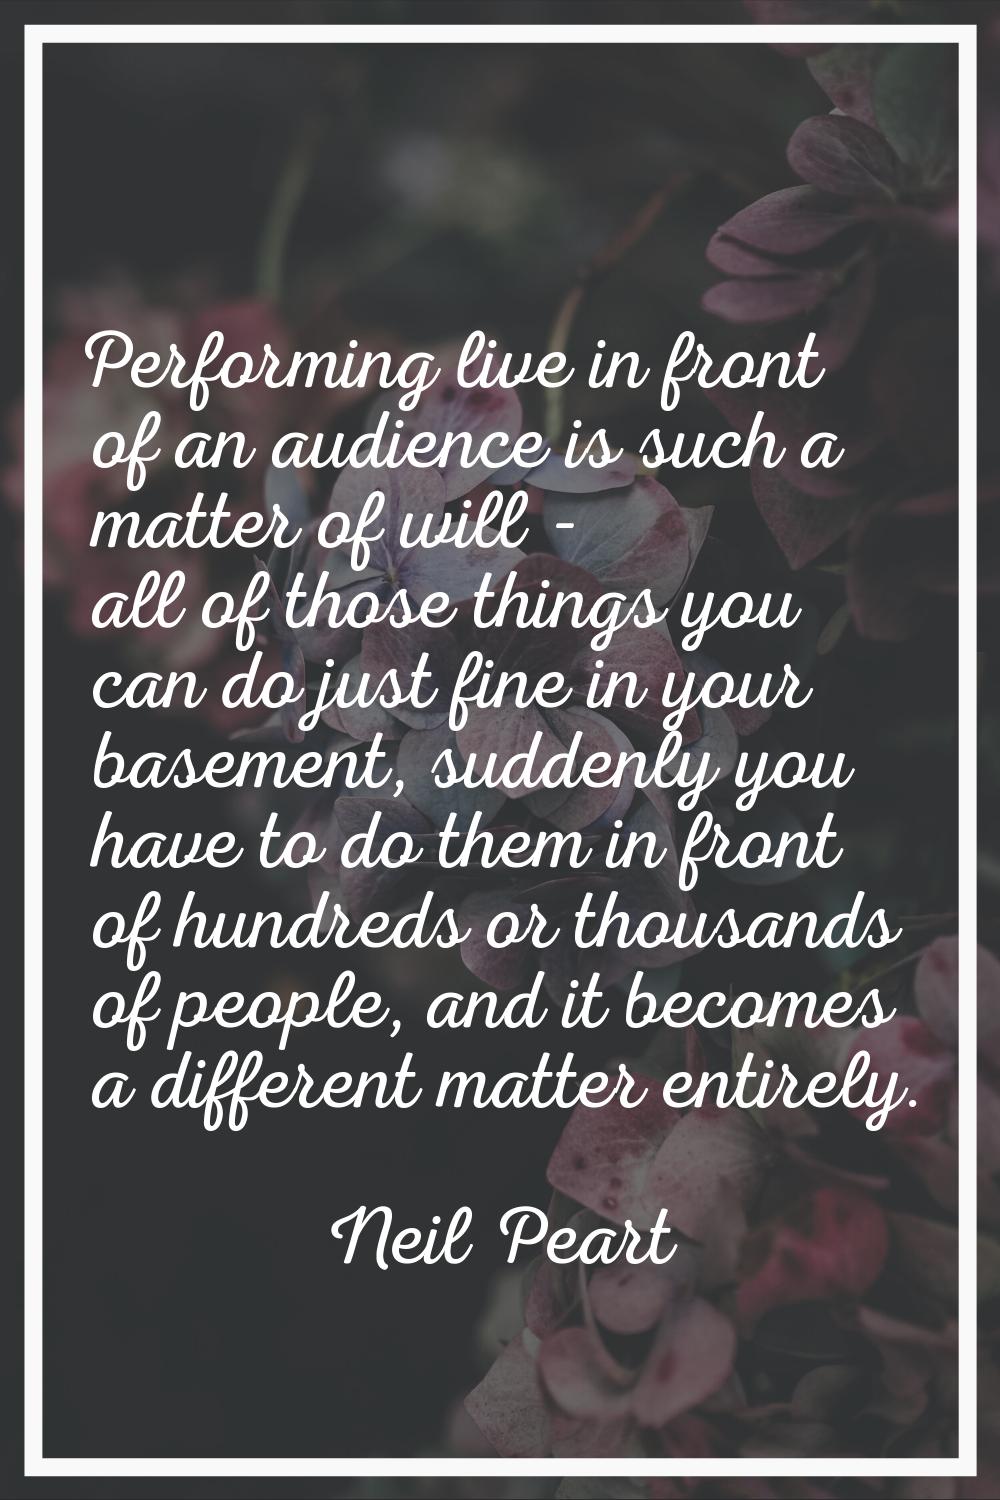 Performing live in front of an audience is such a matter of will - all of those things you can do j